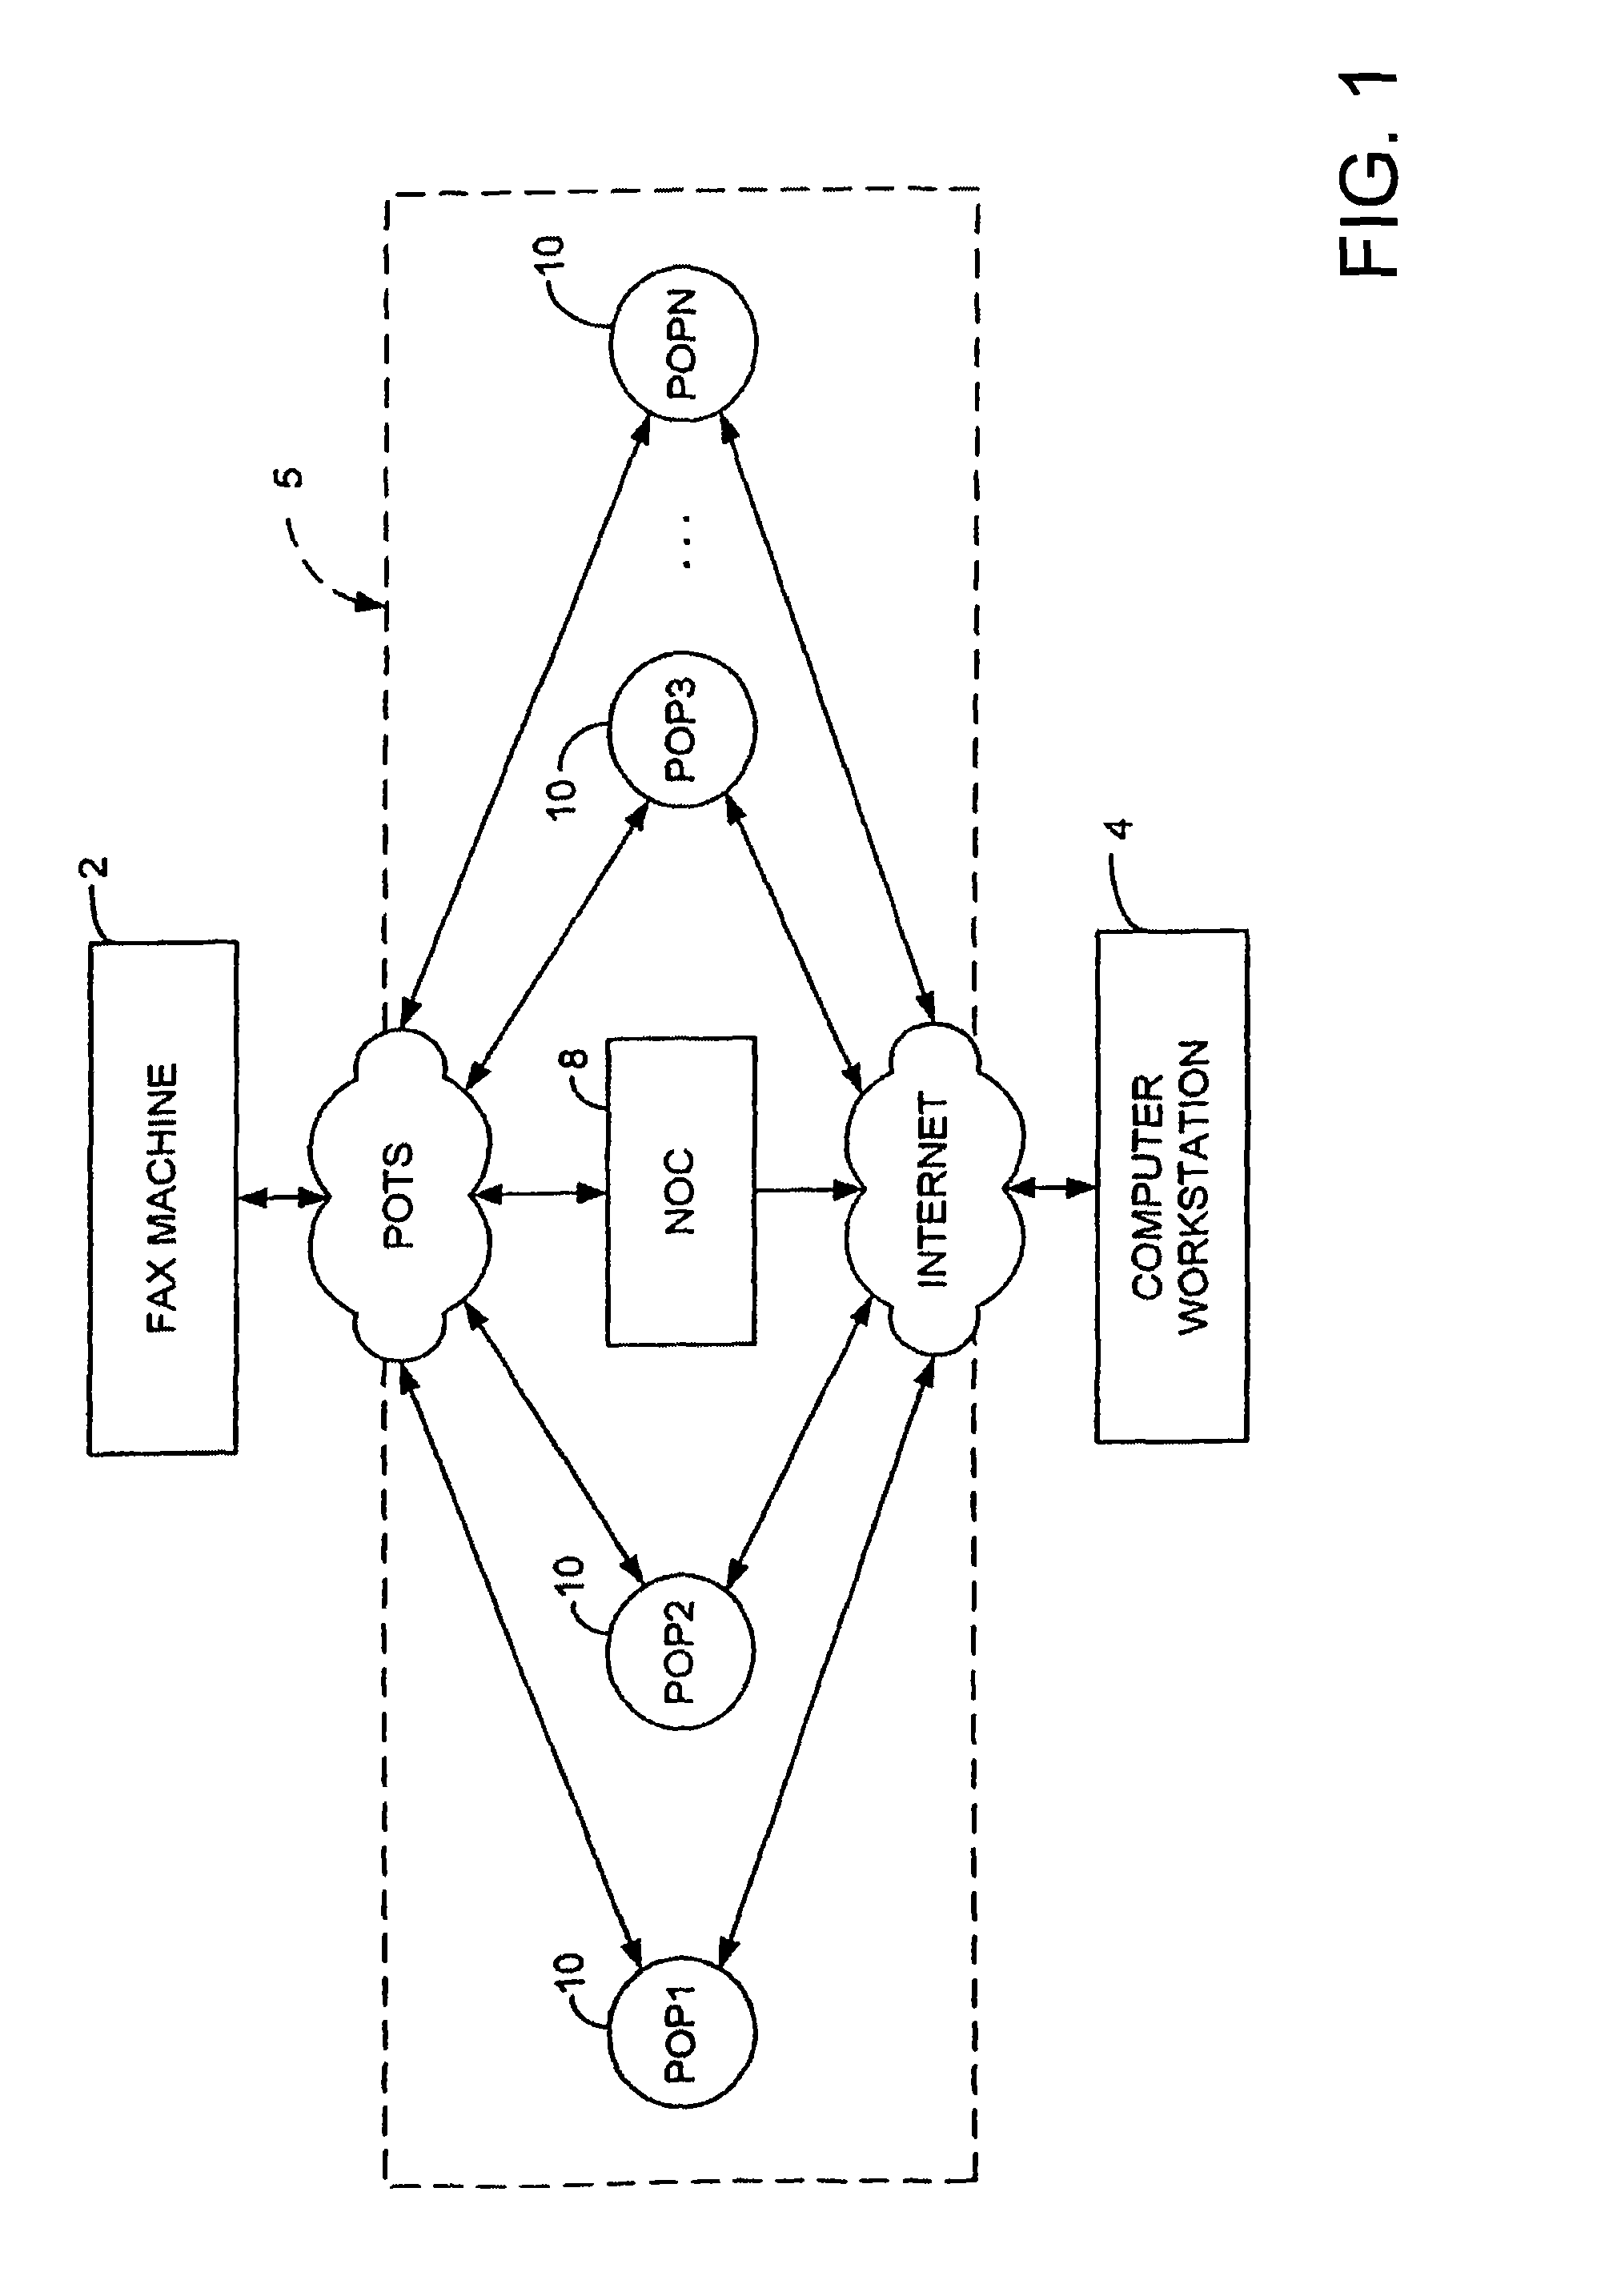 Method and system for entry of electronic data via fax-to-email communication